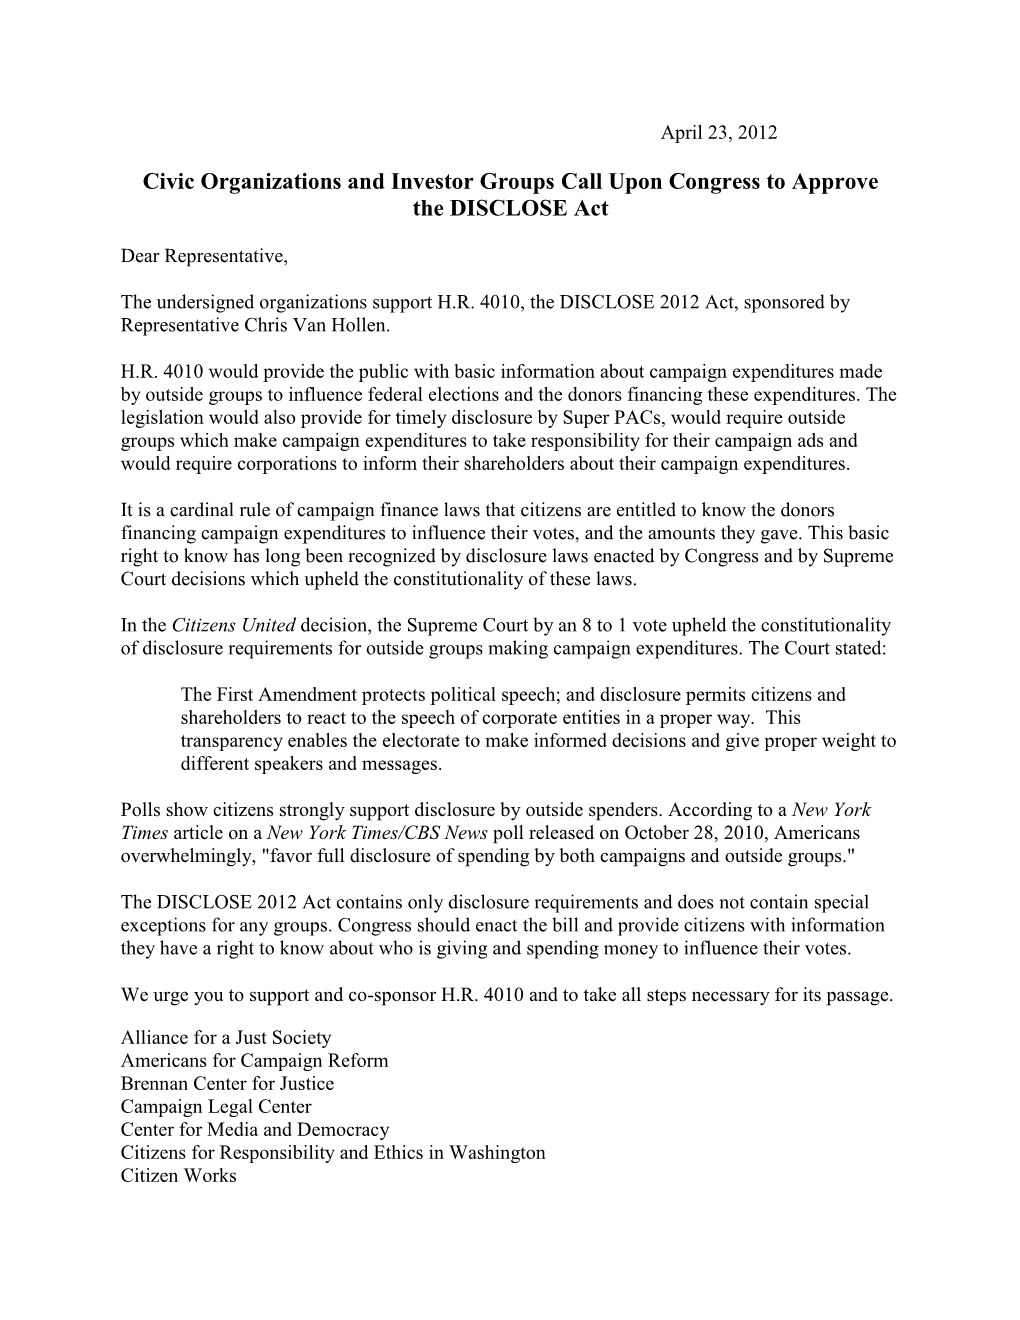 Civic Organizations and Investor Groups Call Upon Congress to Approve the DISCLOSE Act